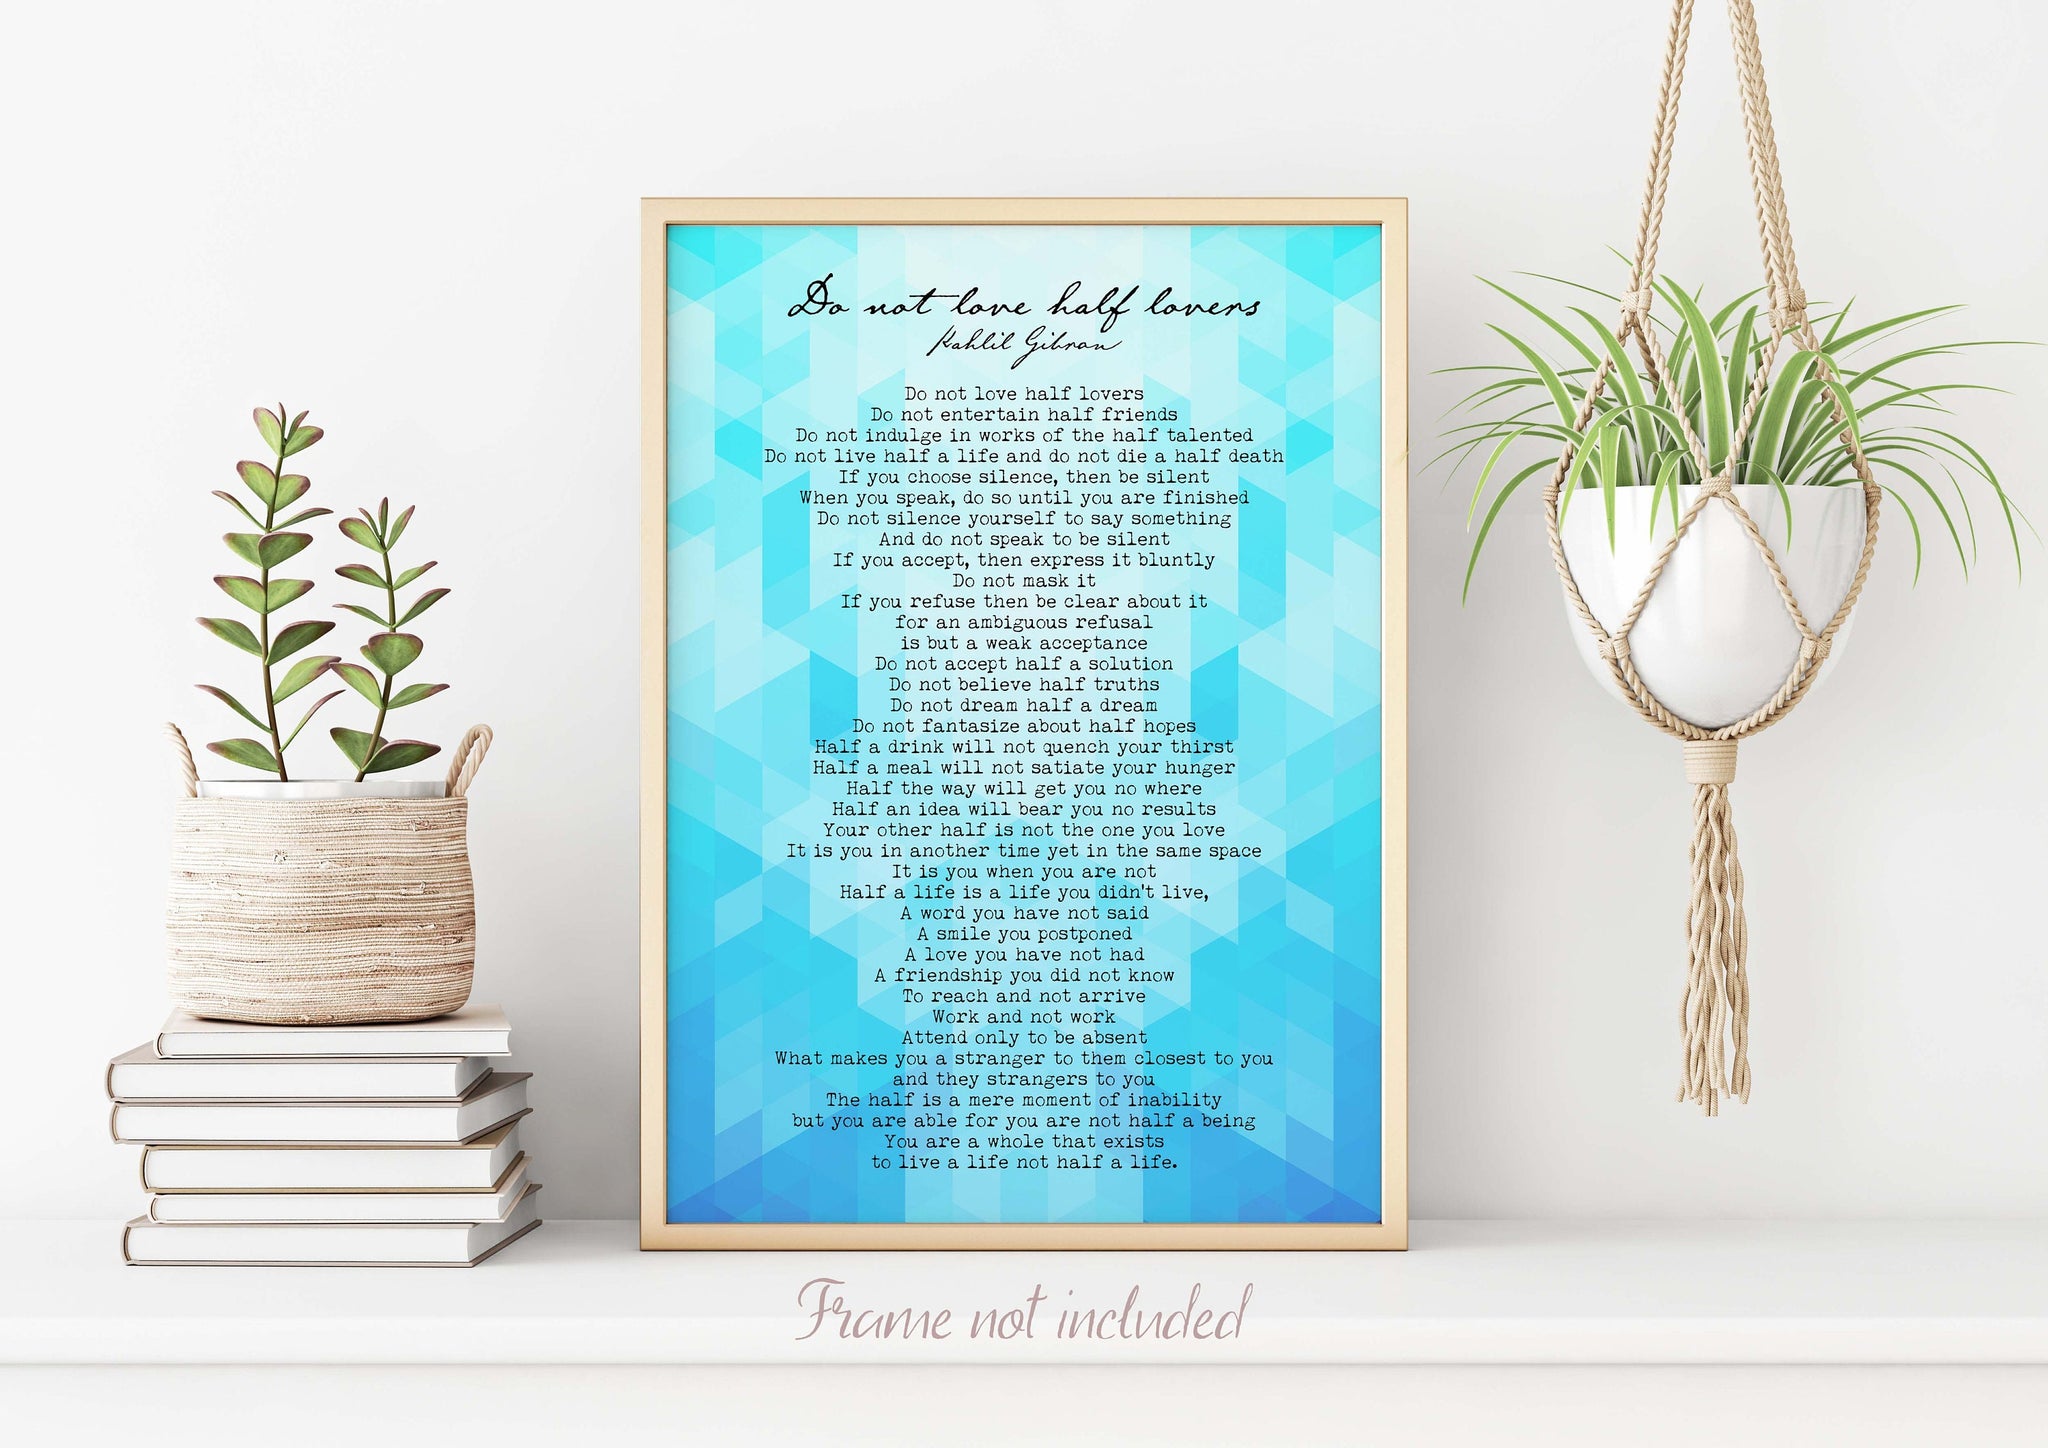 Kahlil Gibran Quote. Do not love half lovers. Art Board Print for